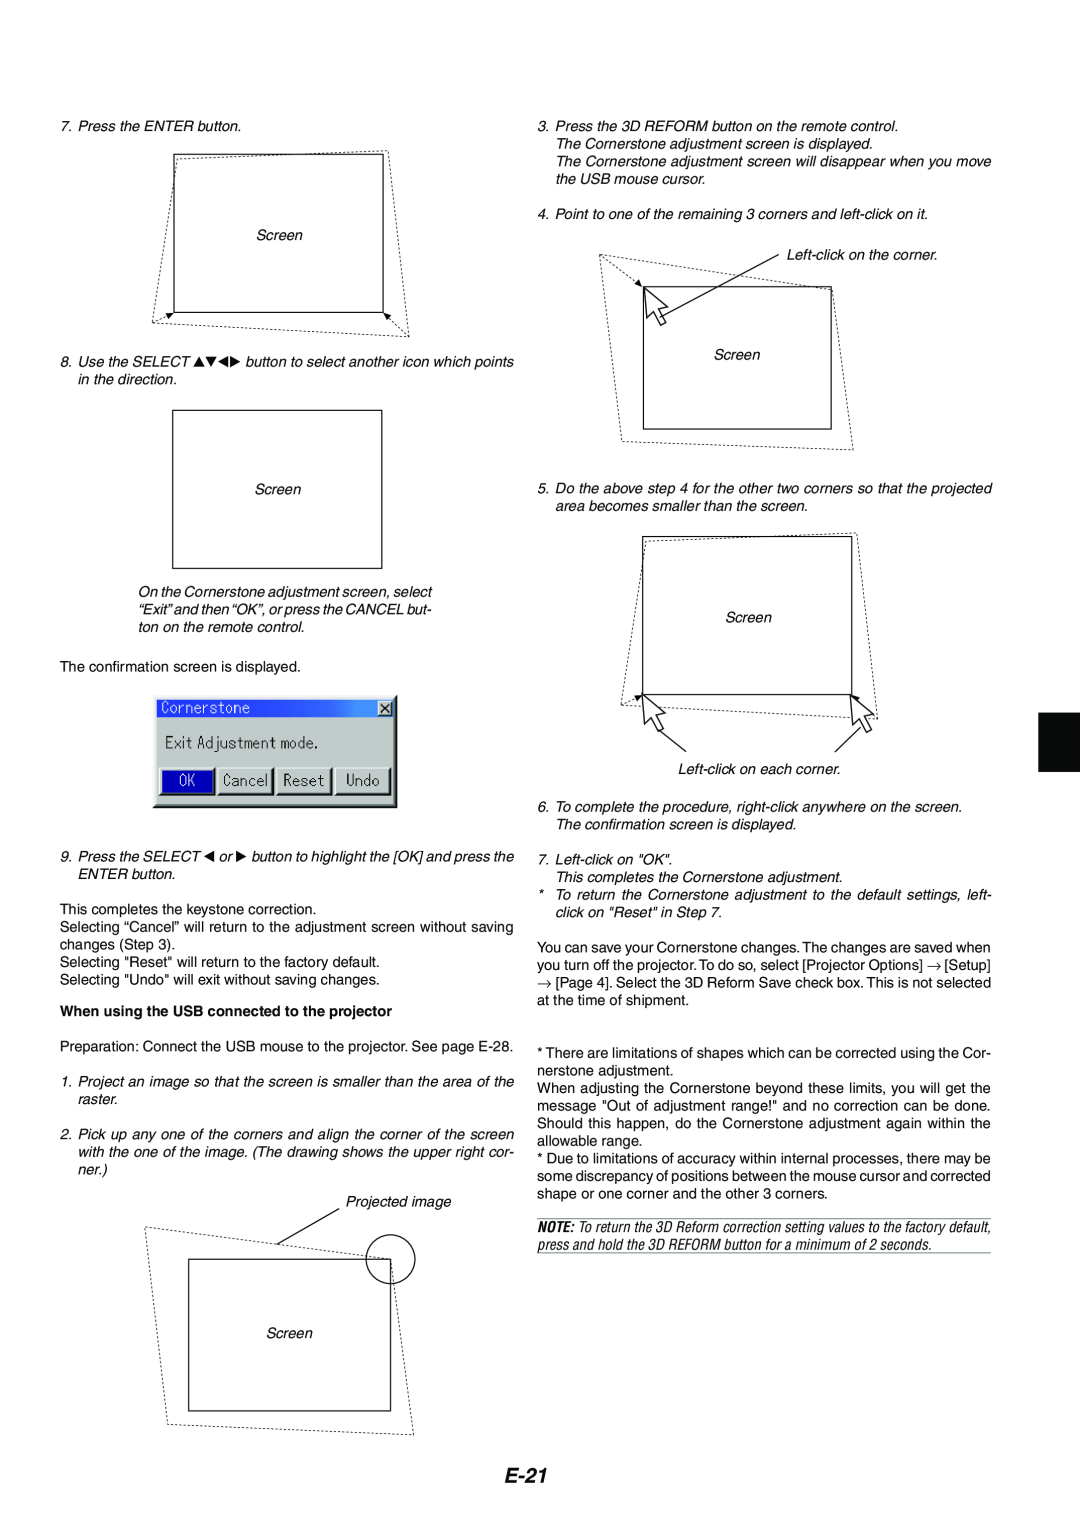 Kensington MT1065, MT1075 user manual E-21, When using the USB connected to the projector 